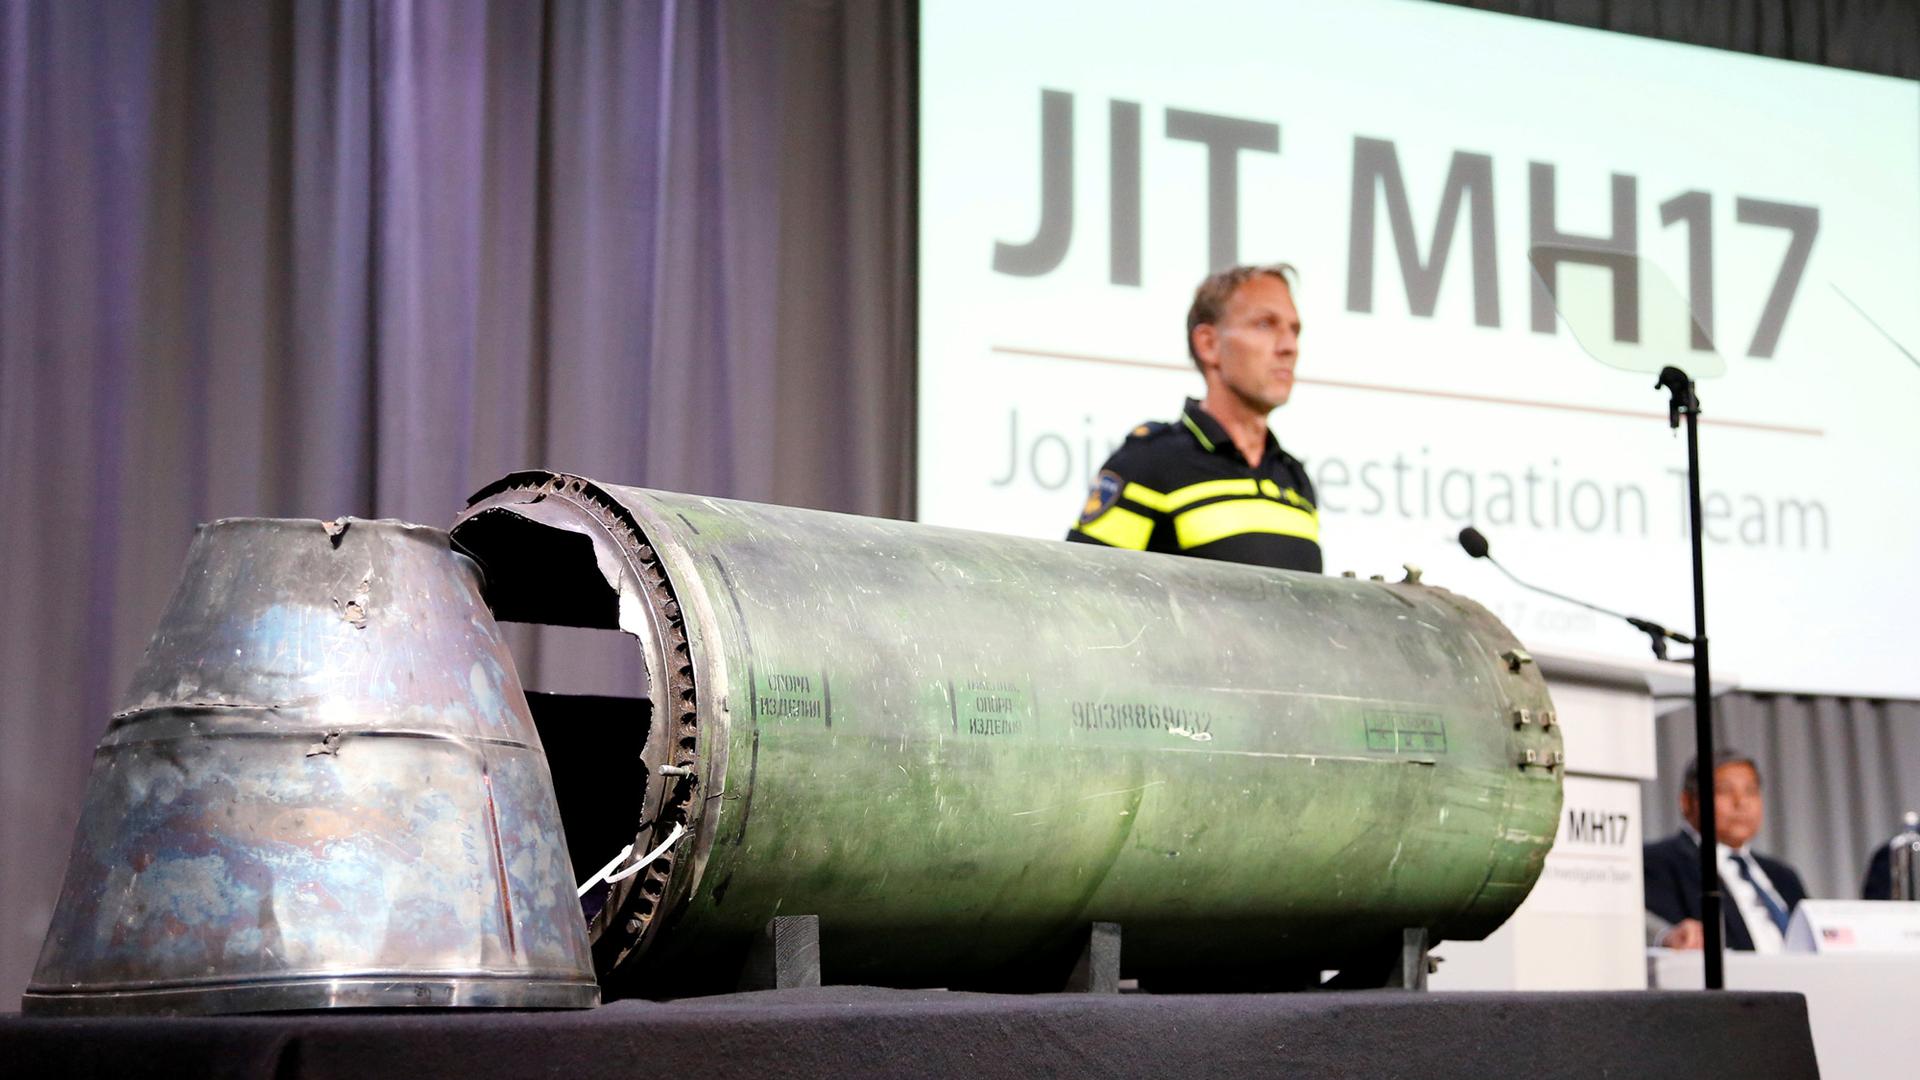 A large piece of silver meta, a damaged missile,l sits on a table while MH 17 is projected in the background of a screen.